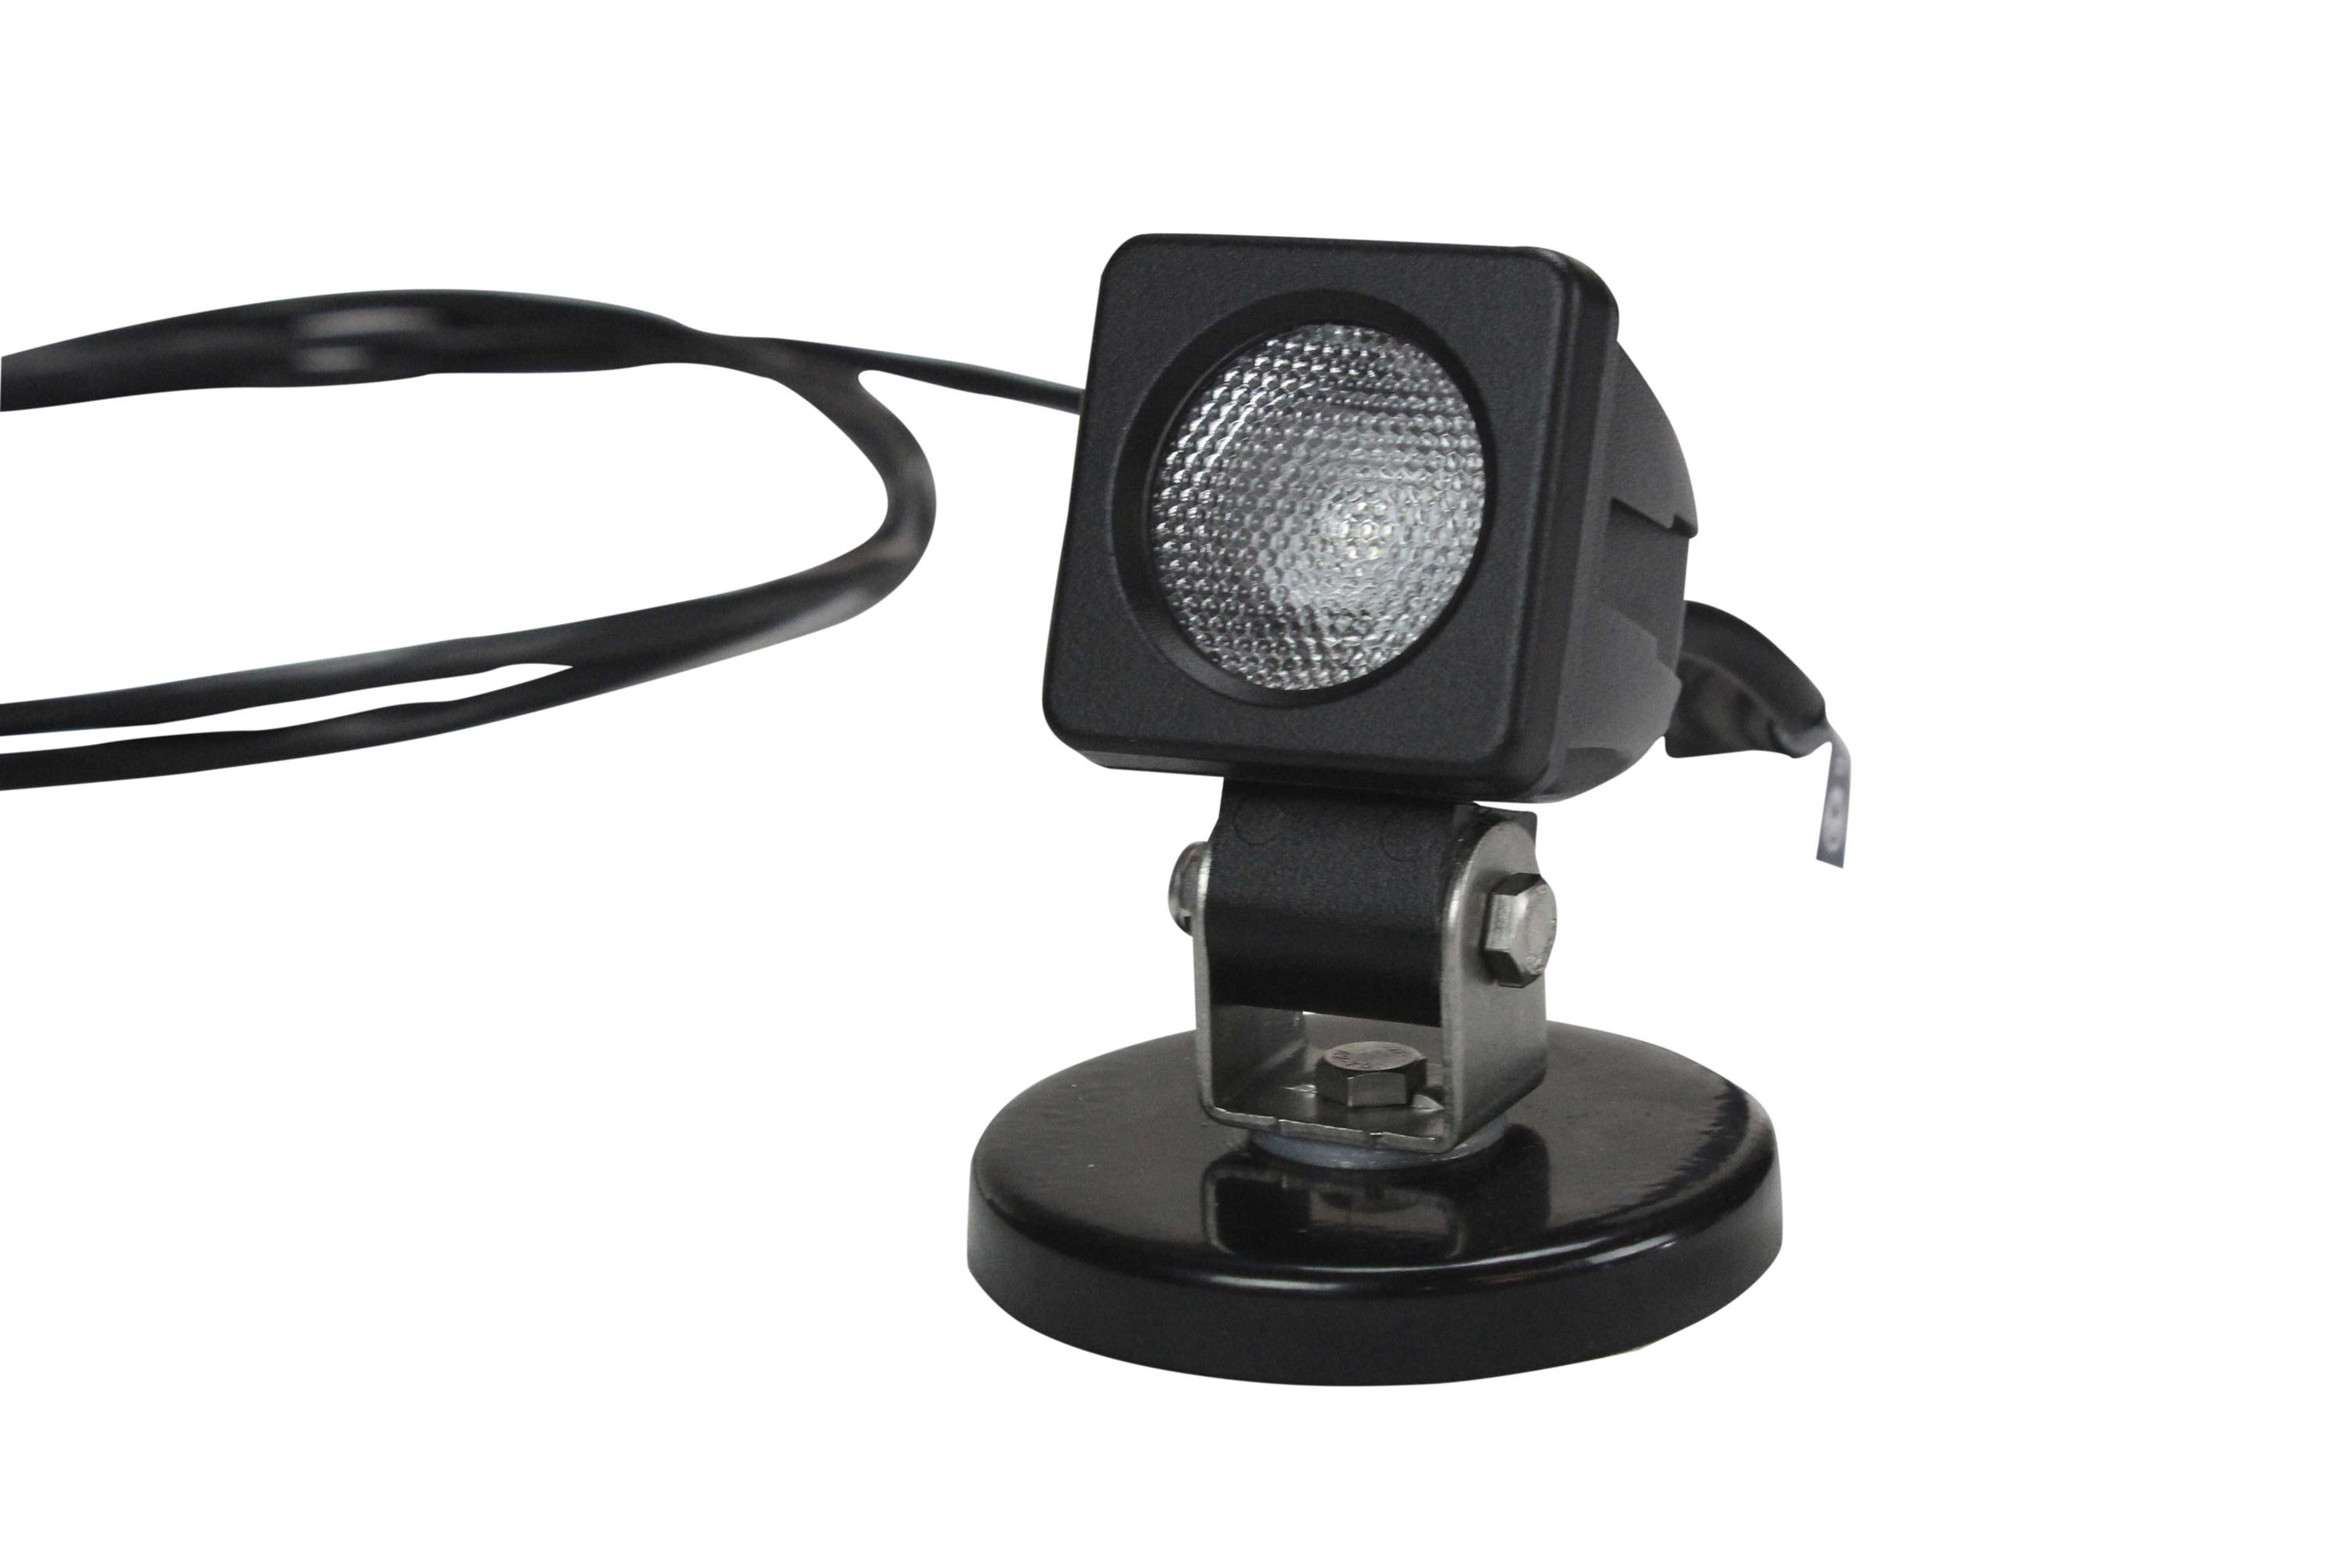 3 Watt Infrared LED Strobe Light with Dual Flash Rate